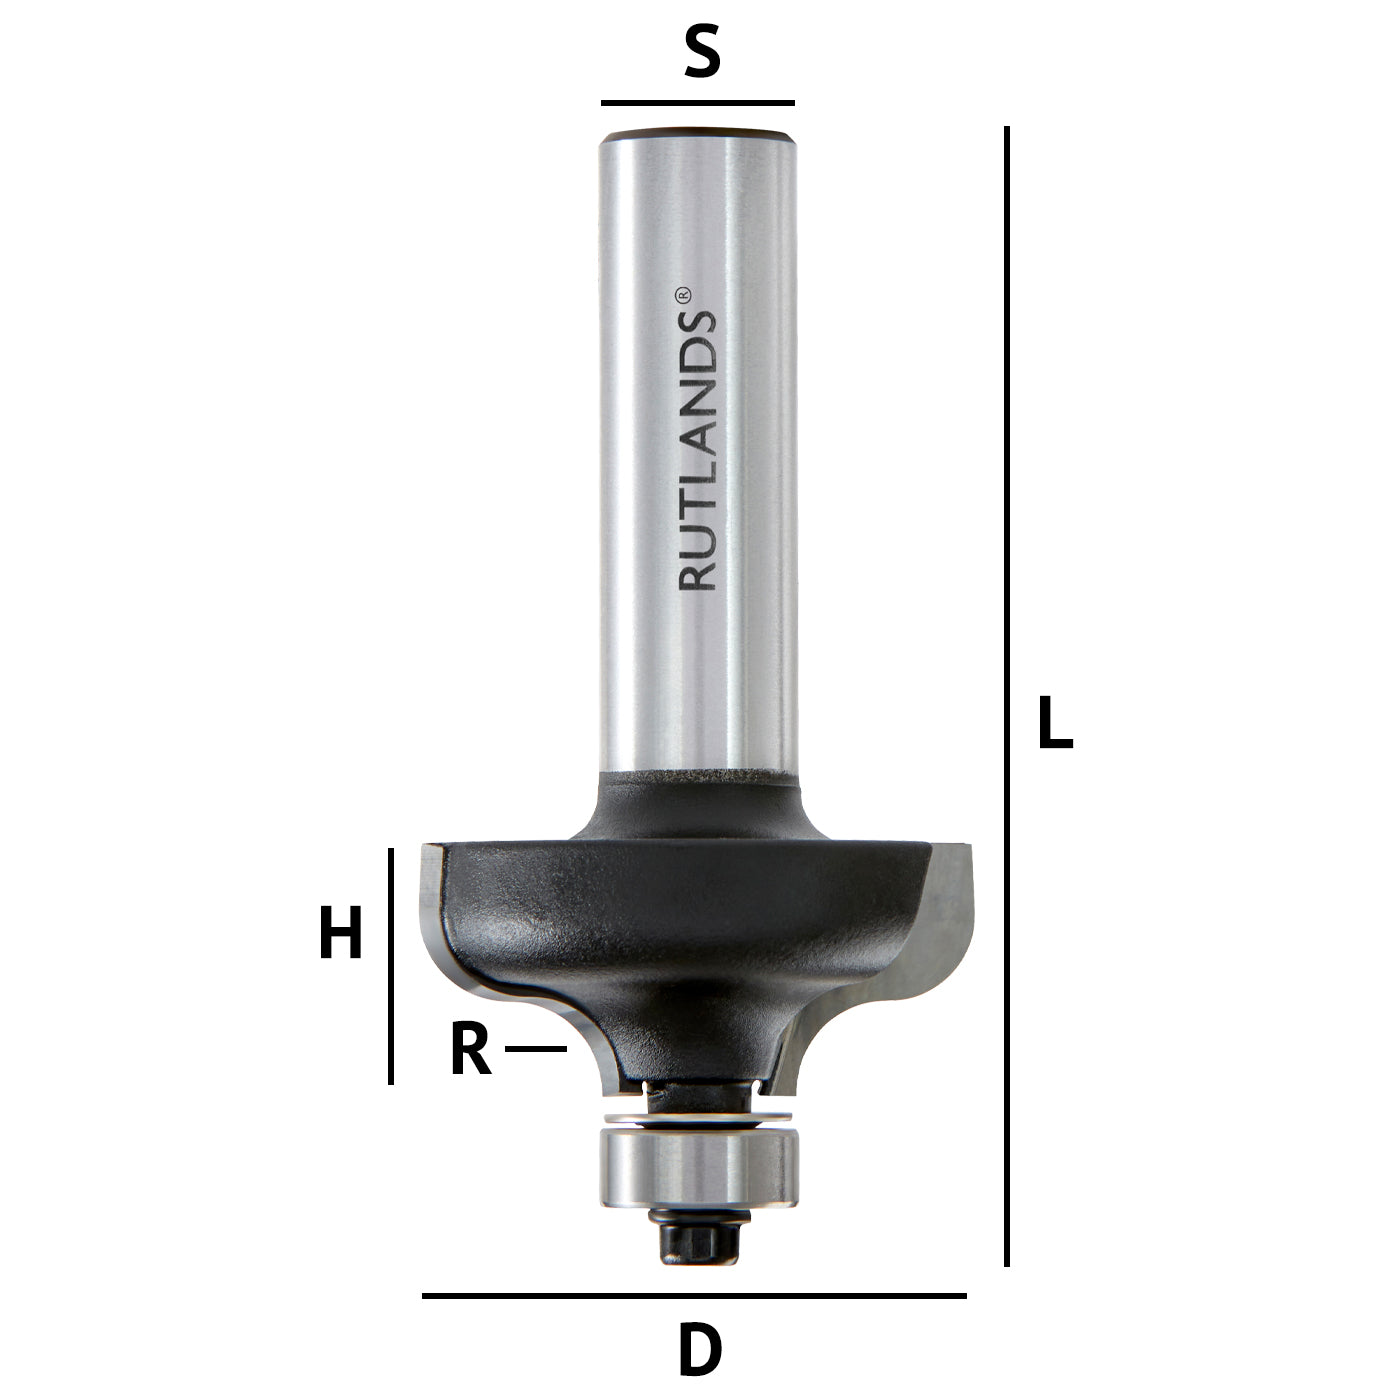 Router Bit - Ogee